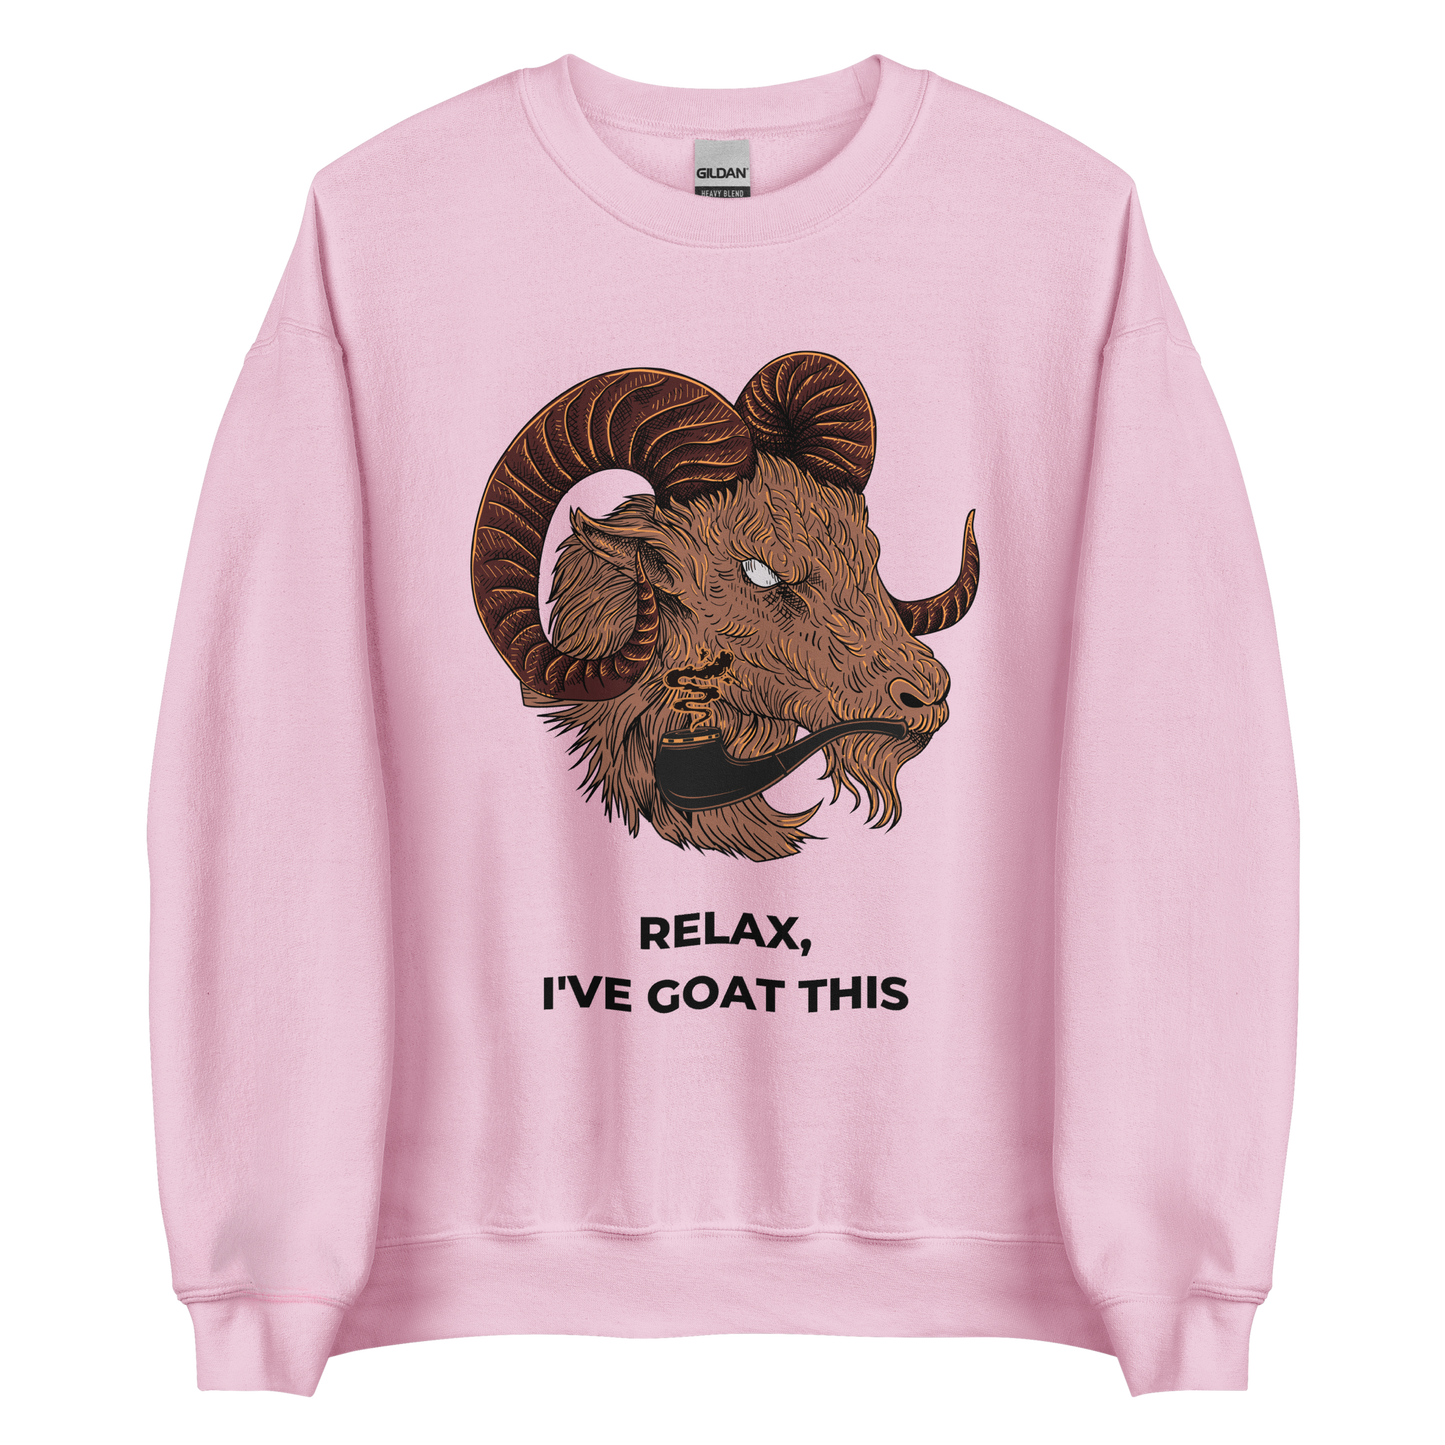 Light Pink Goat Sweatshirt featuring a fierce Relax I've Goat This graphic on the chest - Funny Graphic Goat Sweatshirts - Boozy Fox